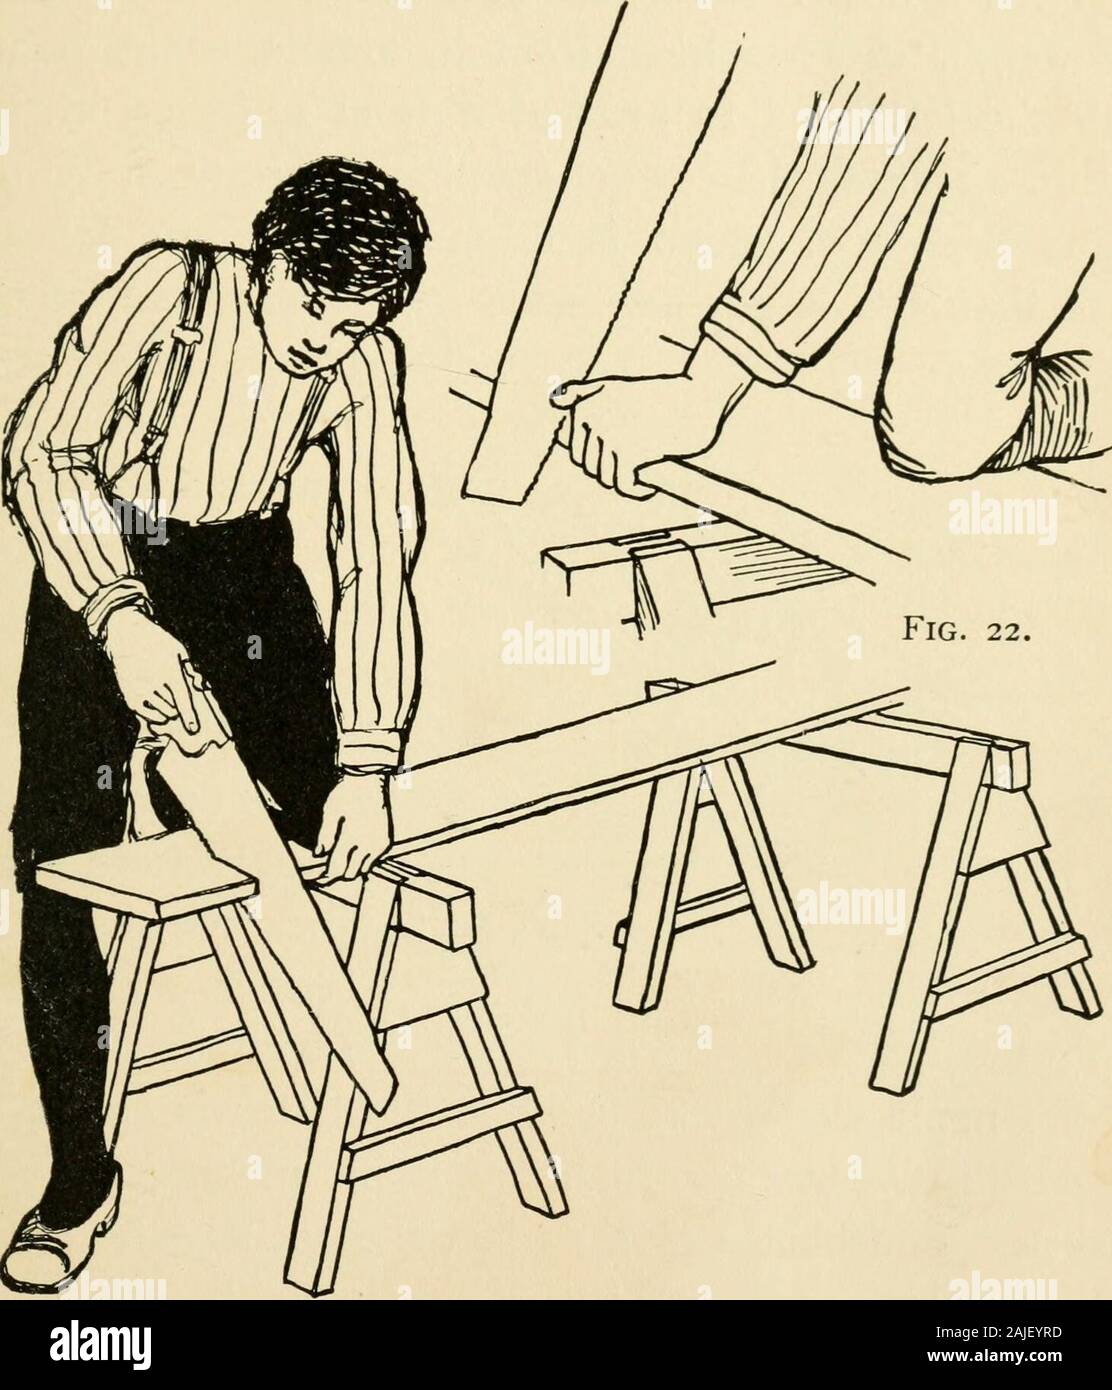 The boy craftsman; practical ad profitable ideas for a boy's leisure hours . ?znsL U/Iling ??.iiiiima- MSjp Edge-of-3aw.Fig. 20. — Teeth of Rip Saw. THE PROPER HANDLING OF TOOLS 23 a few short strokes until the saw has started to cut.Then use a long, steady stroke, putting all of the. Fig. 21. —Position for Sawing. pressure upon the down stroke. Be careful to keepthe saw to the line and in a perpendicular position,so that the cut will be square on all sides. If it starts 24 PROFITABLE PASTIMES to run away from the line, a slight twist of the bladewill return it. When a board has been sawn near Stock Photo